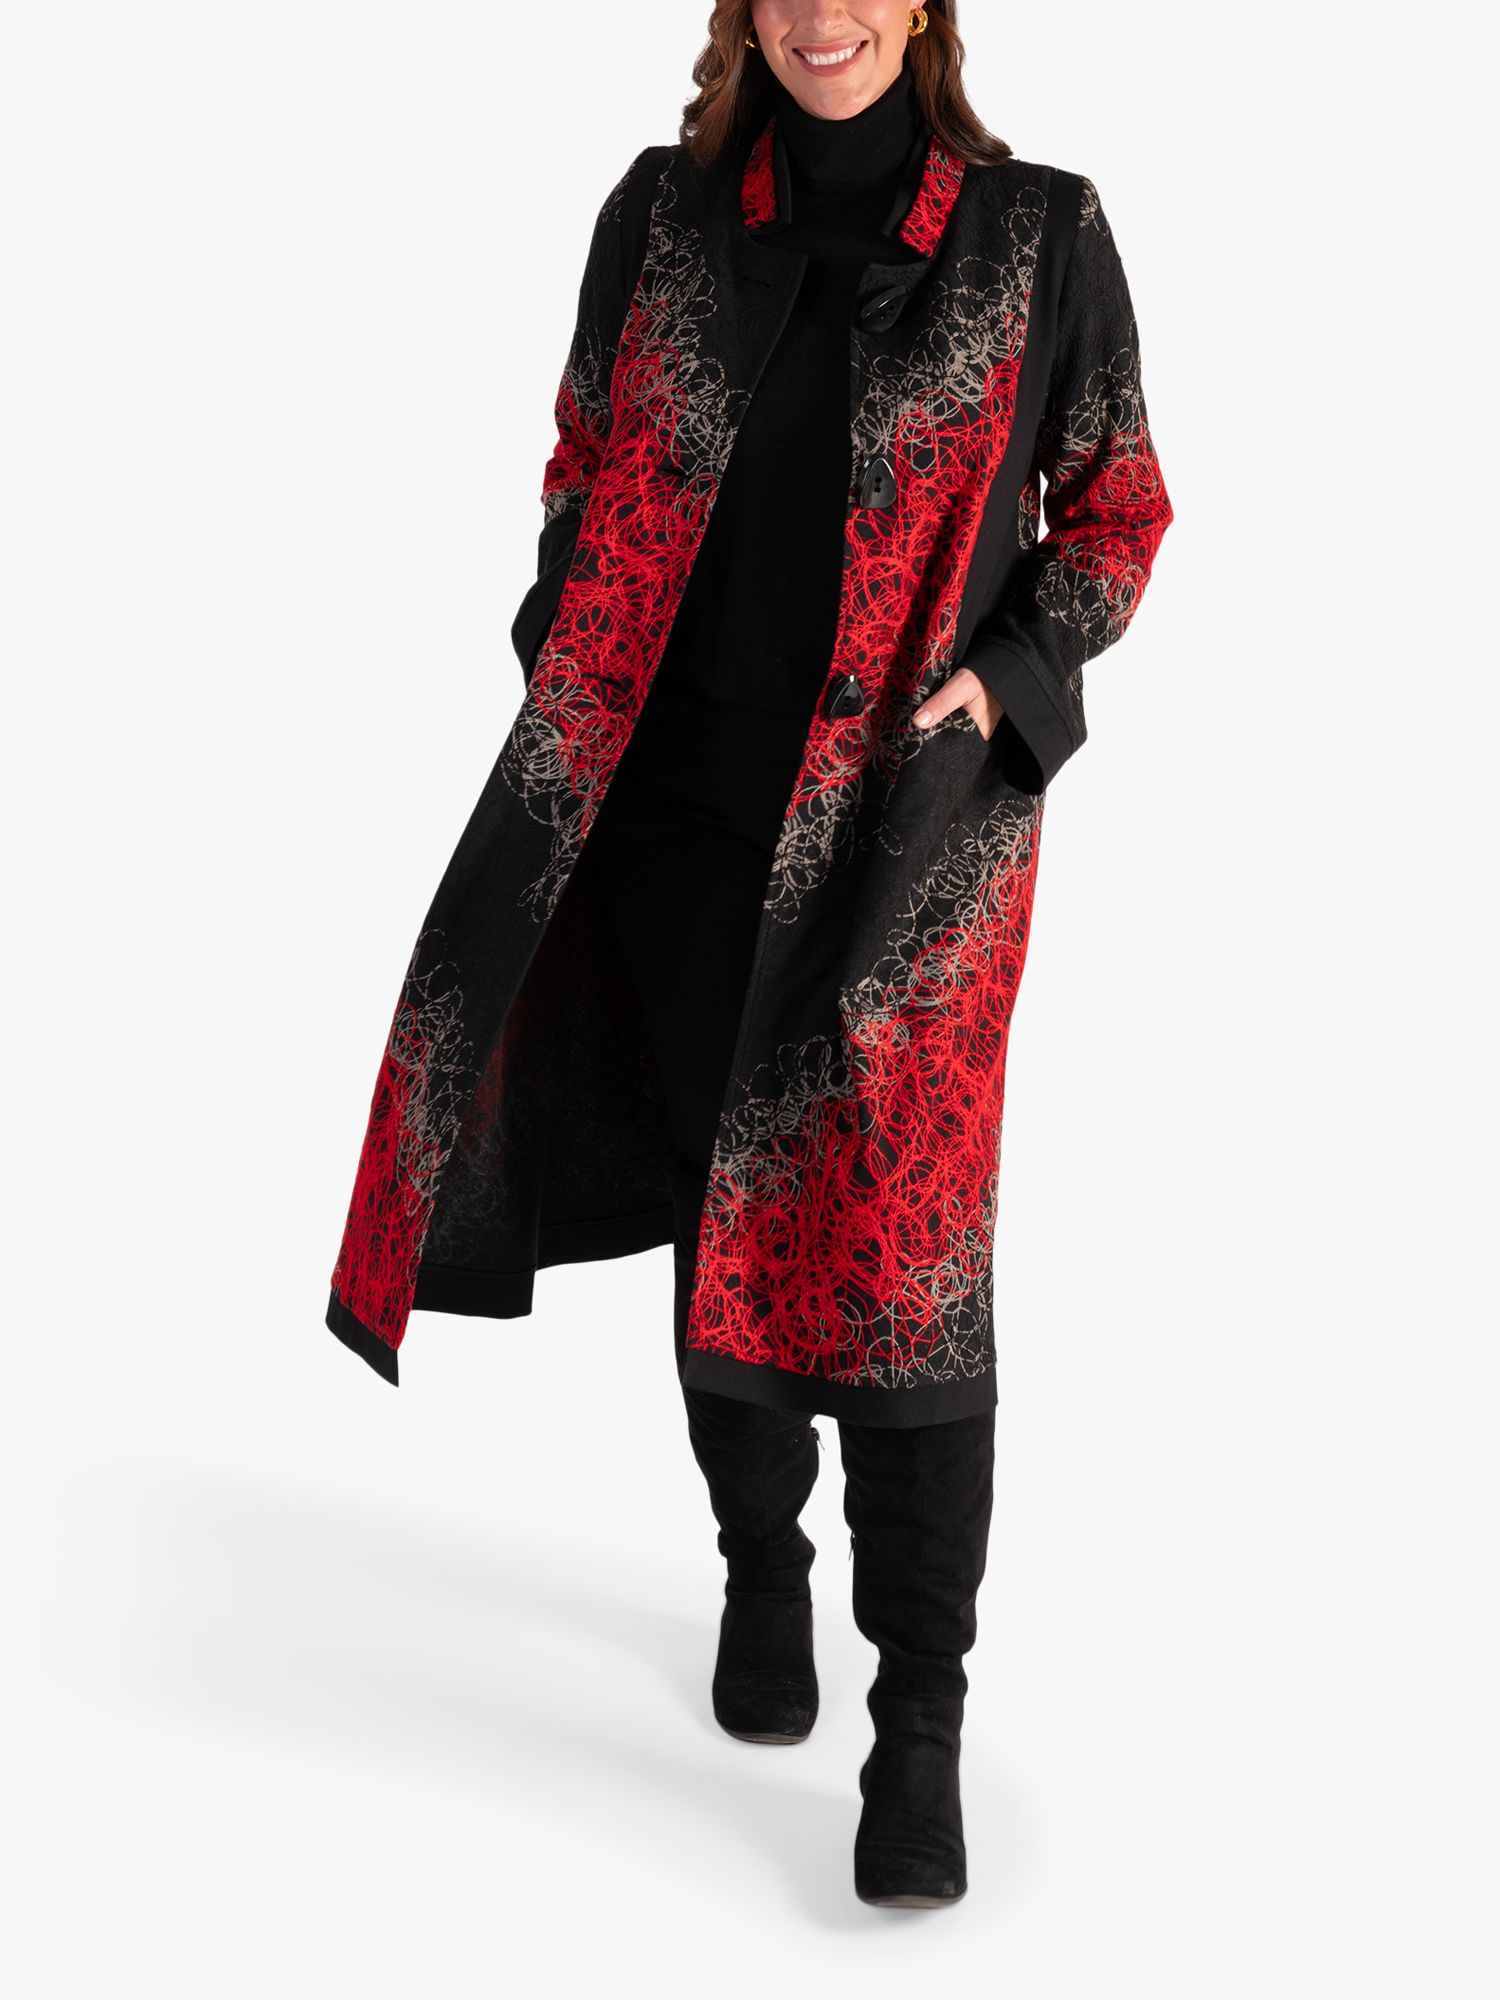 Buy chesca Scribble Embroidered Coat, Black/Red Online at johnlewis.com